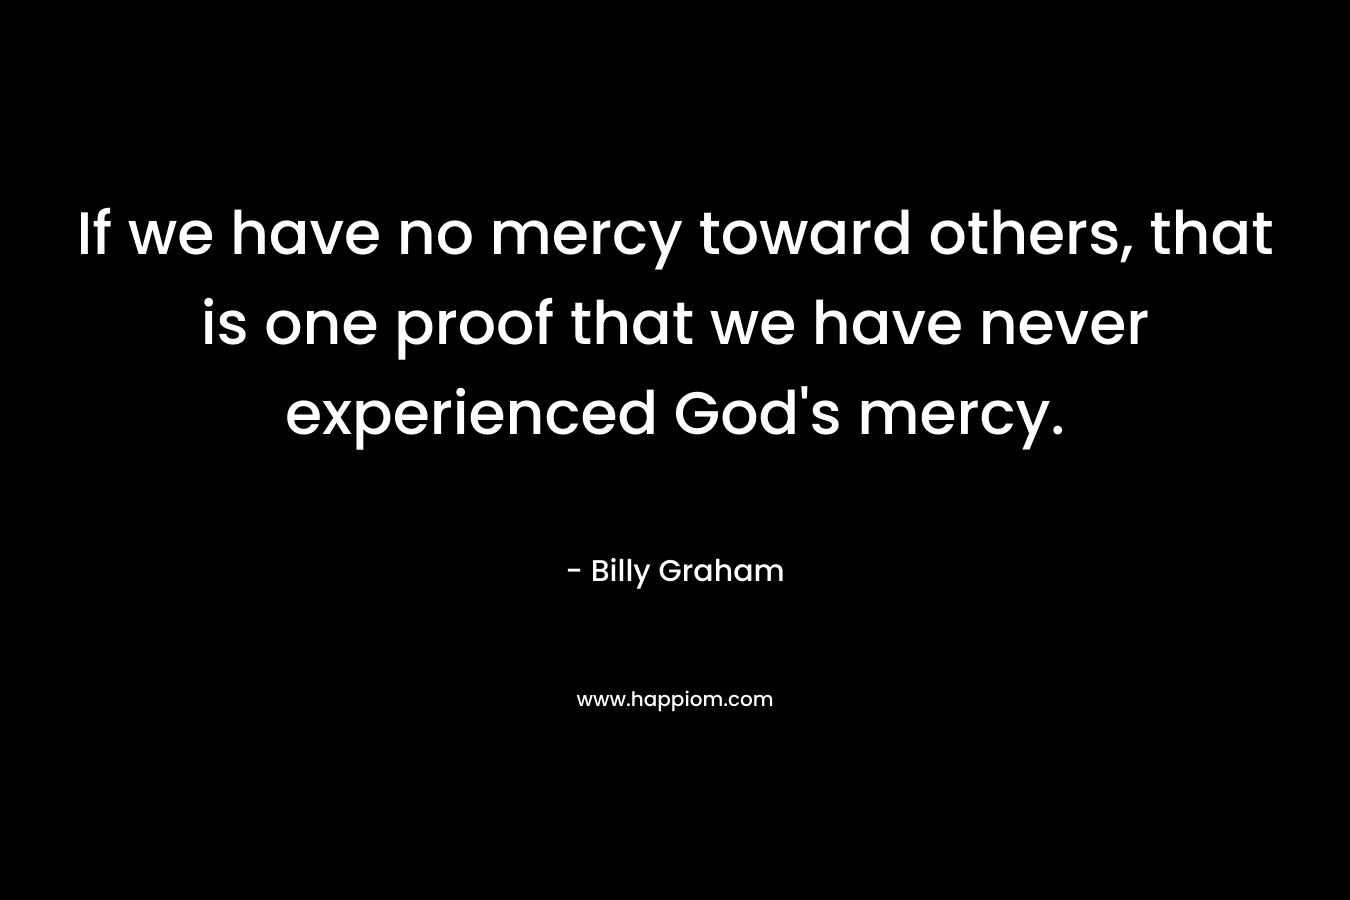 If we have no mercy toward others, that is one proof that we have never experienced God's mercy.